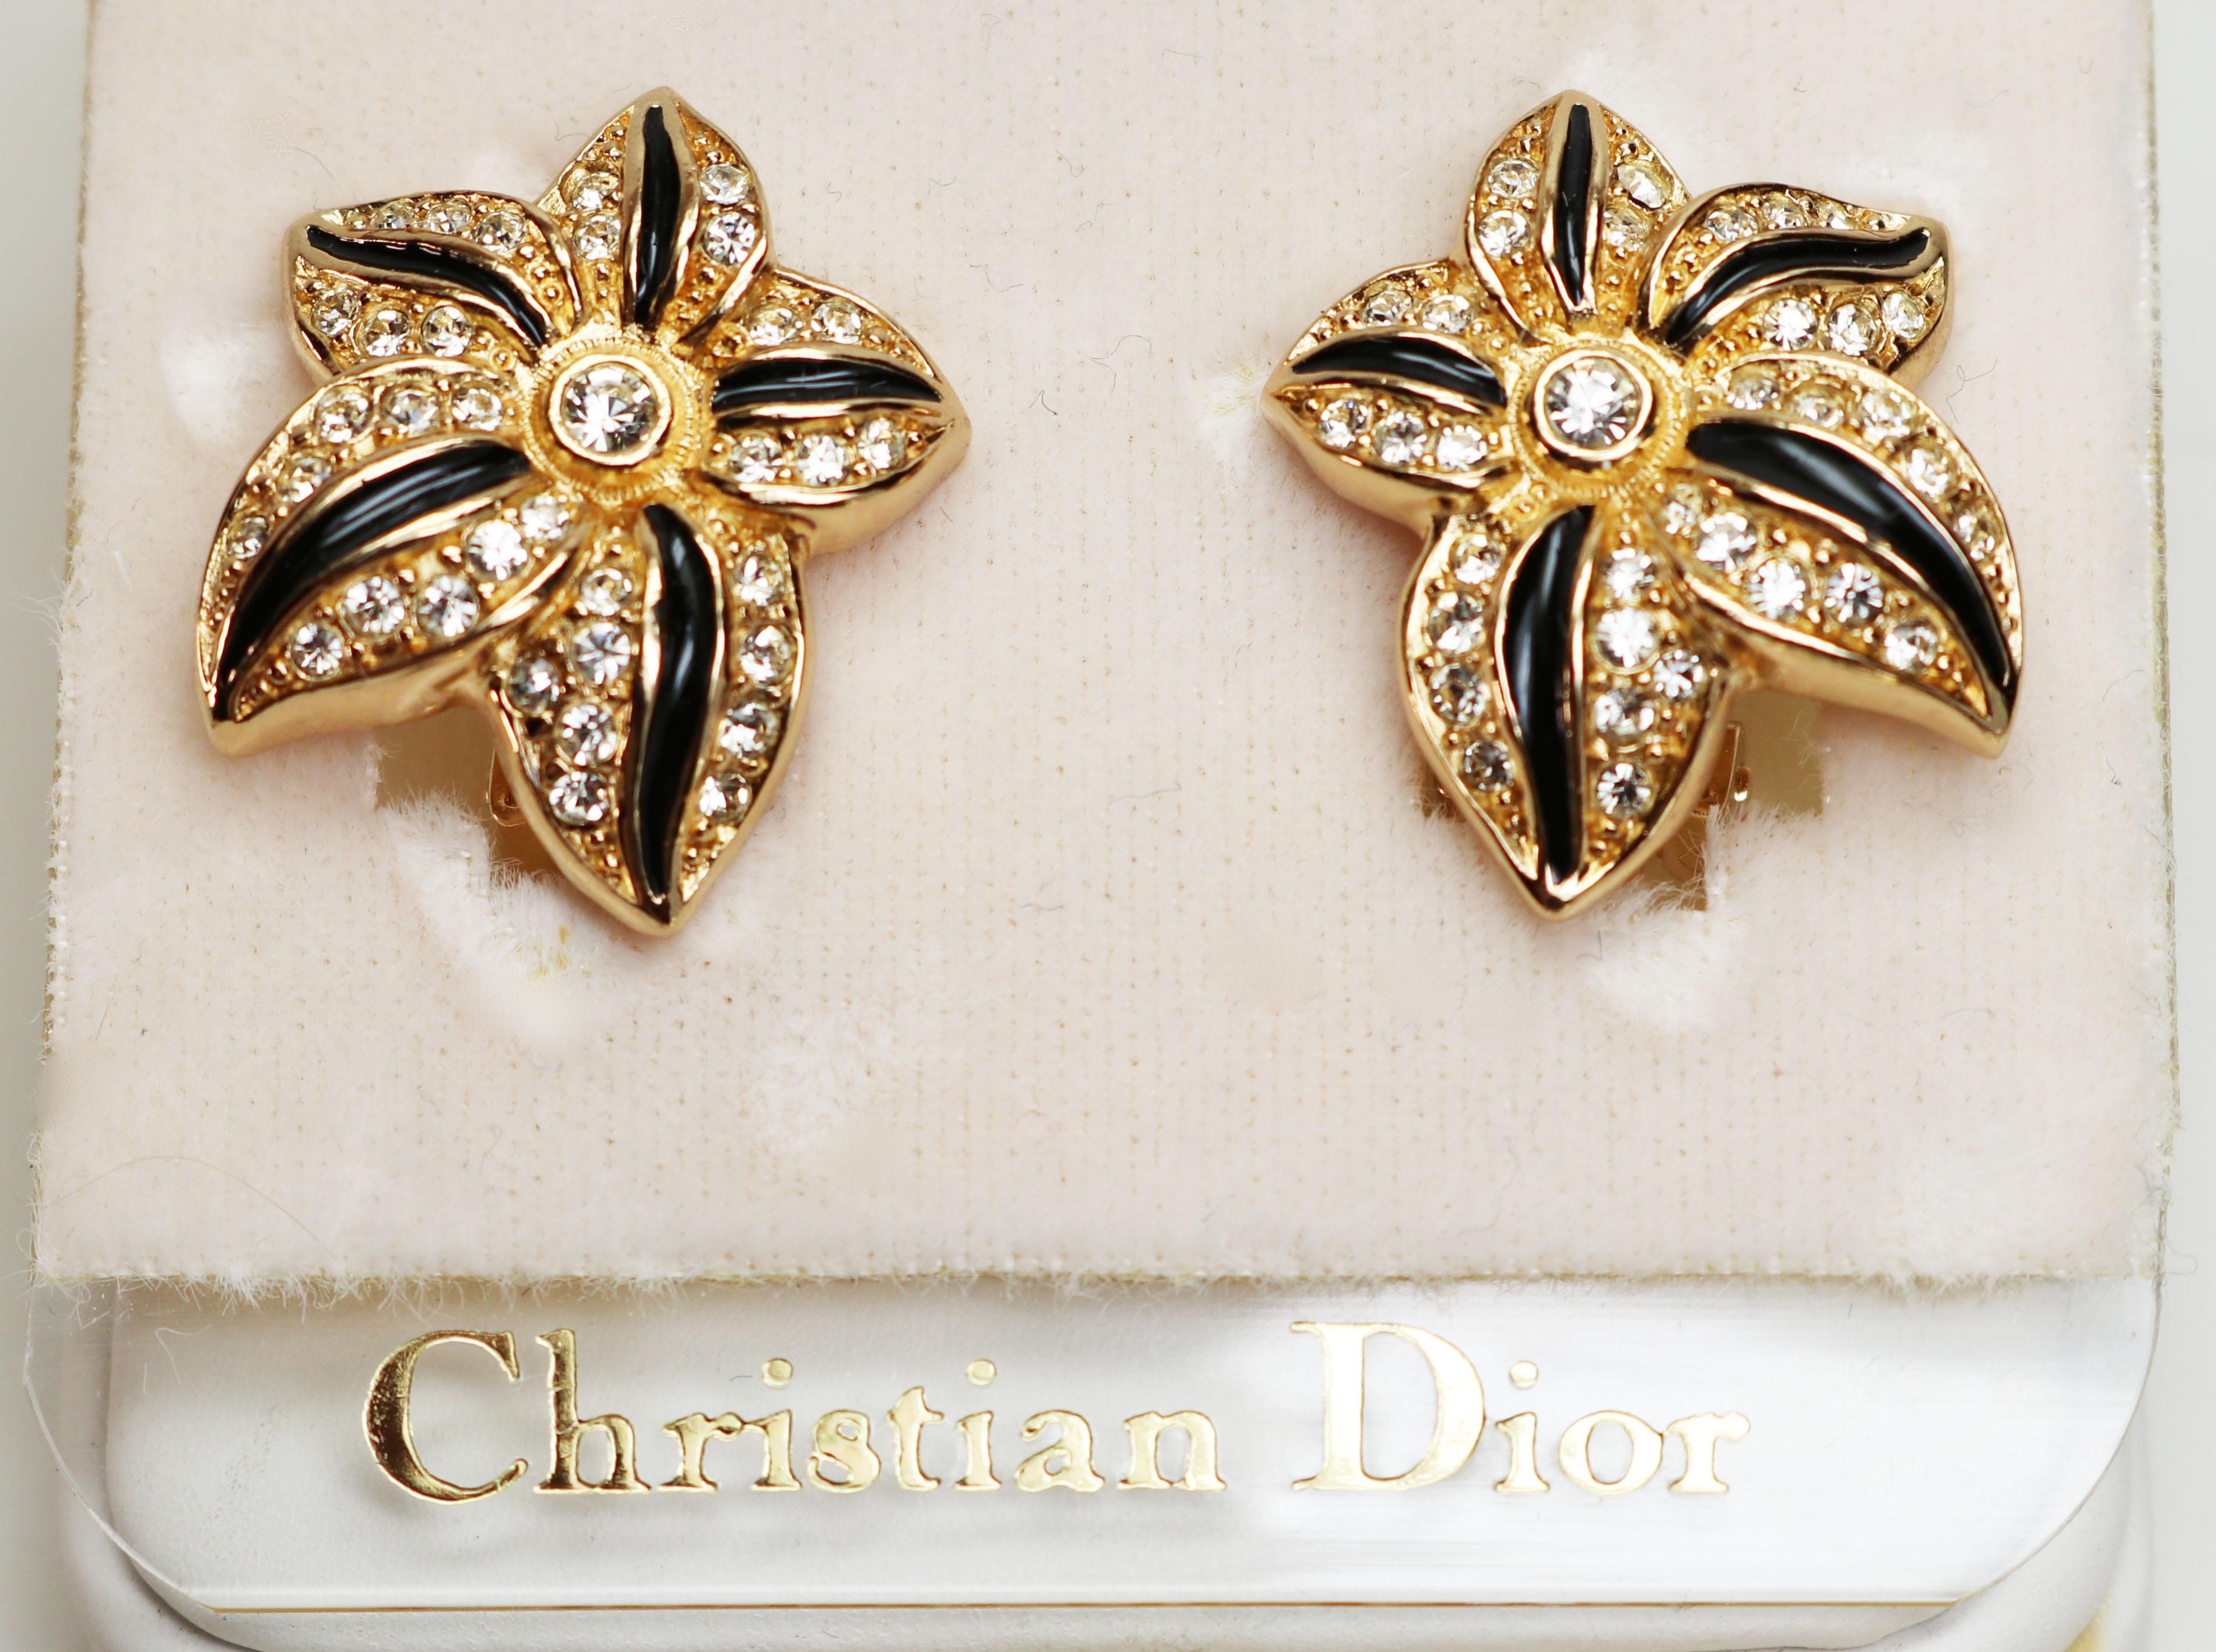 Christian Dior Floral Earrings In Excellent Condition For Sale In Mastic Beach, NY